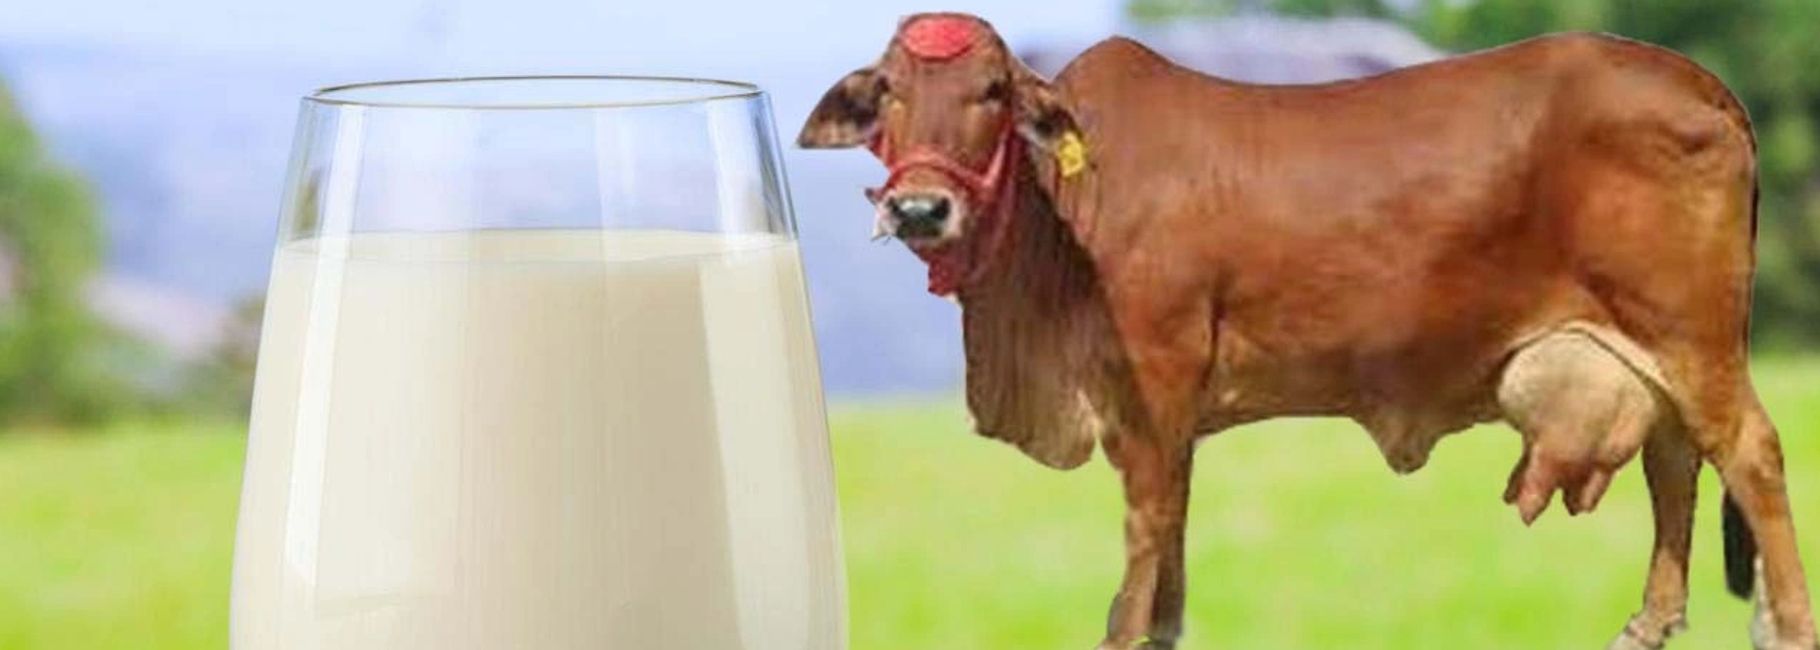 A2 Milk A2 Milk Products A2 Milk In India Best A2